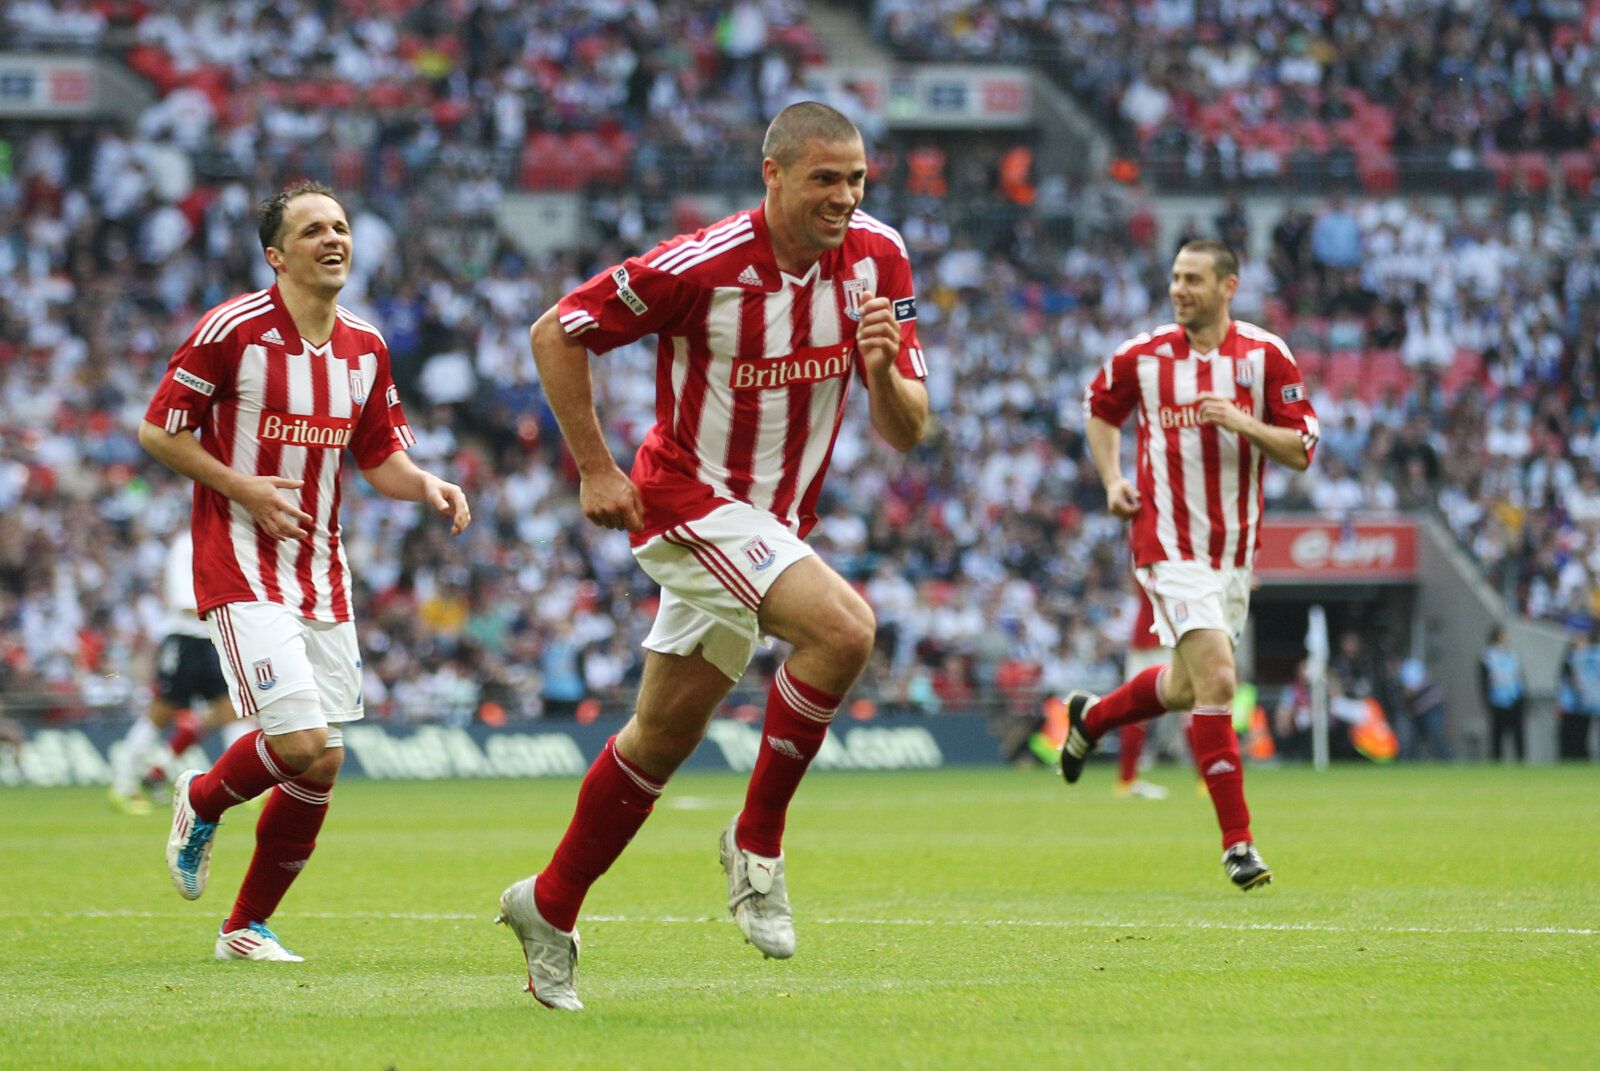 Football - Bolton Wanderers v Stoke City FA Cup Semi Final - Wembley Stadium - 10/11 - 17/4/11 
Jonathan Walters (C) celebrates after scoring the fifth goal for Stoke 
Mandatory Credit: Action Images / Carl Recine 
Livepic